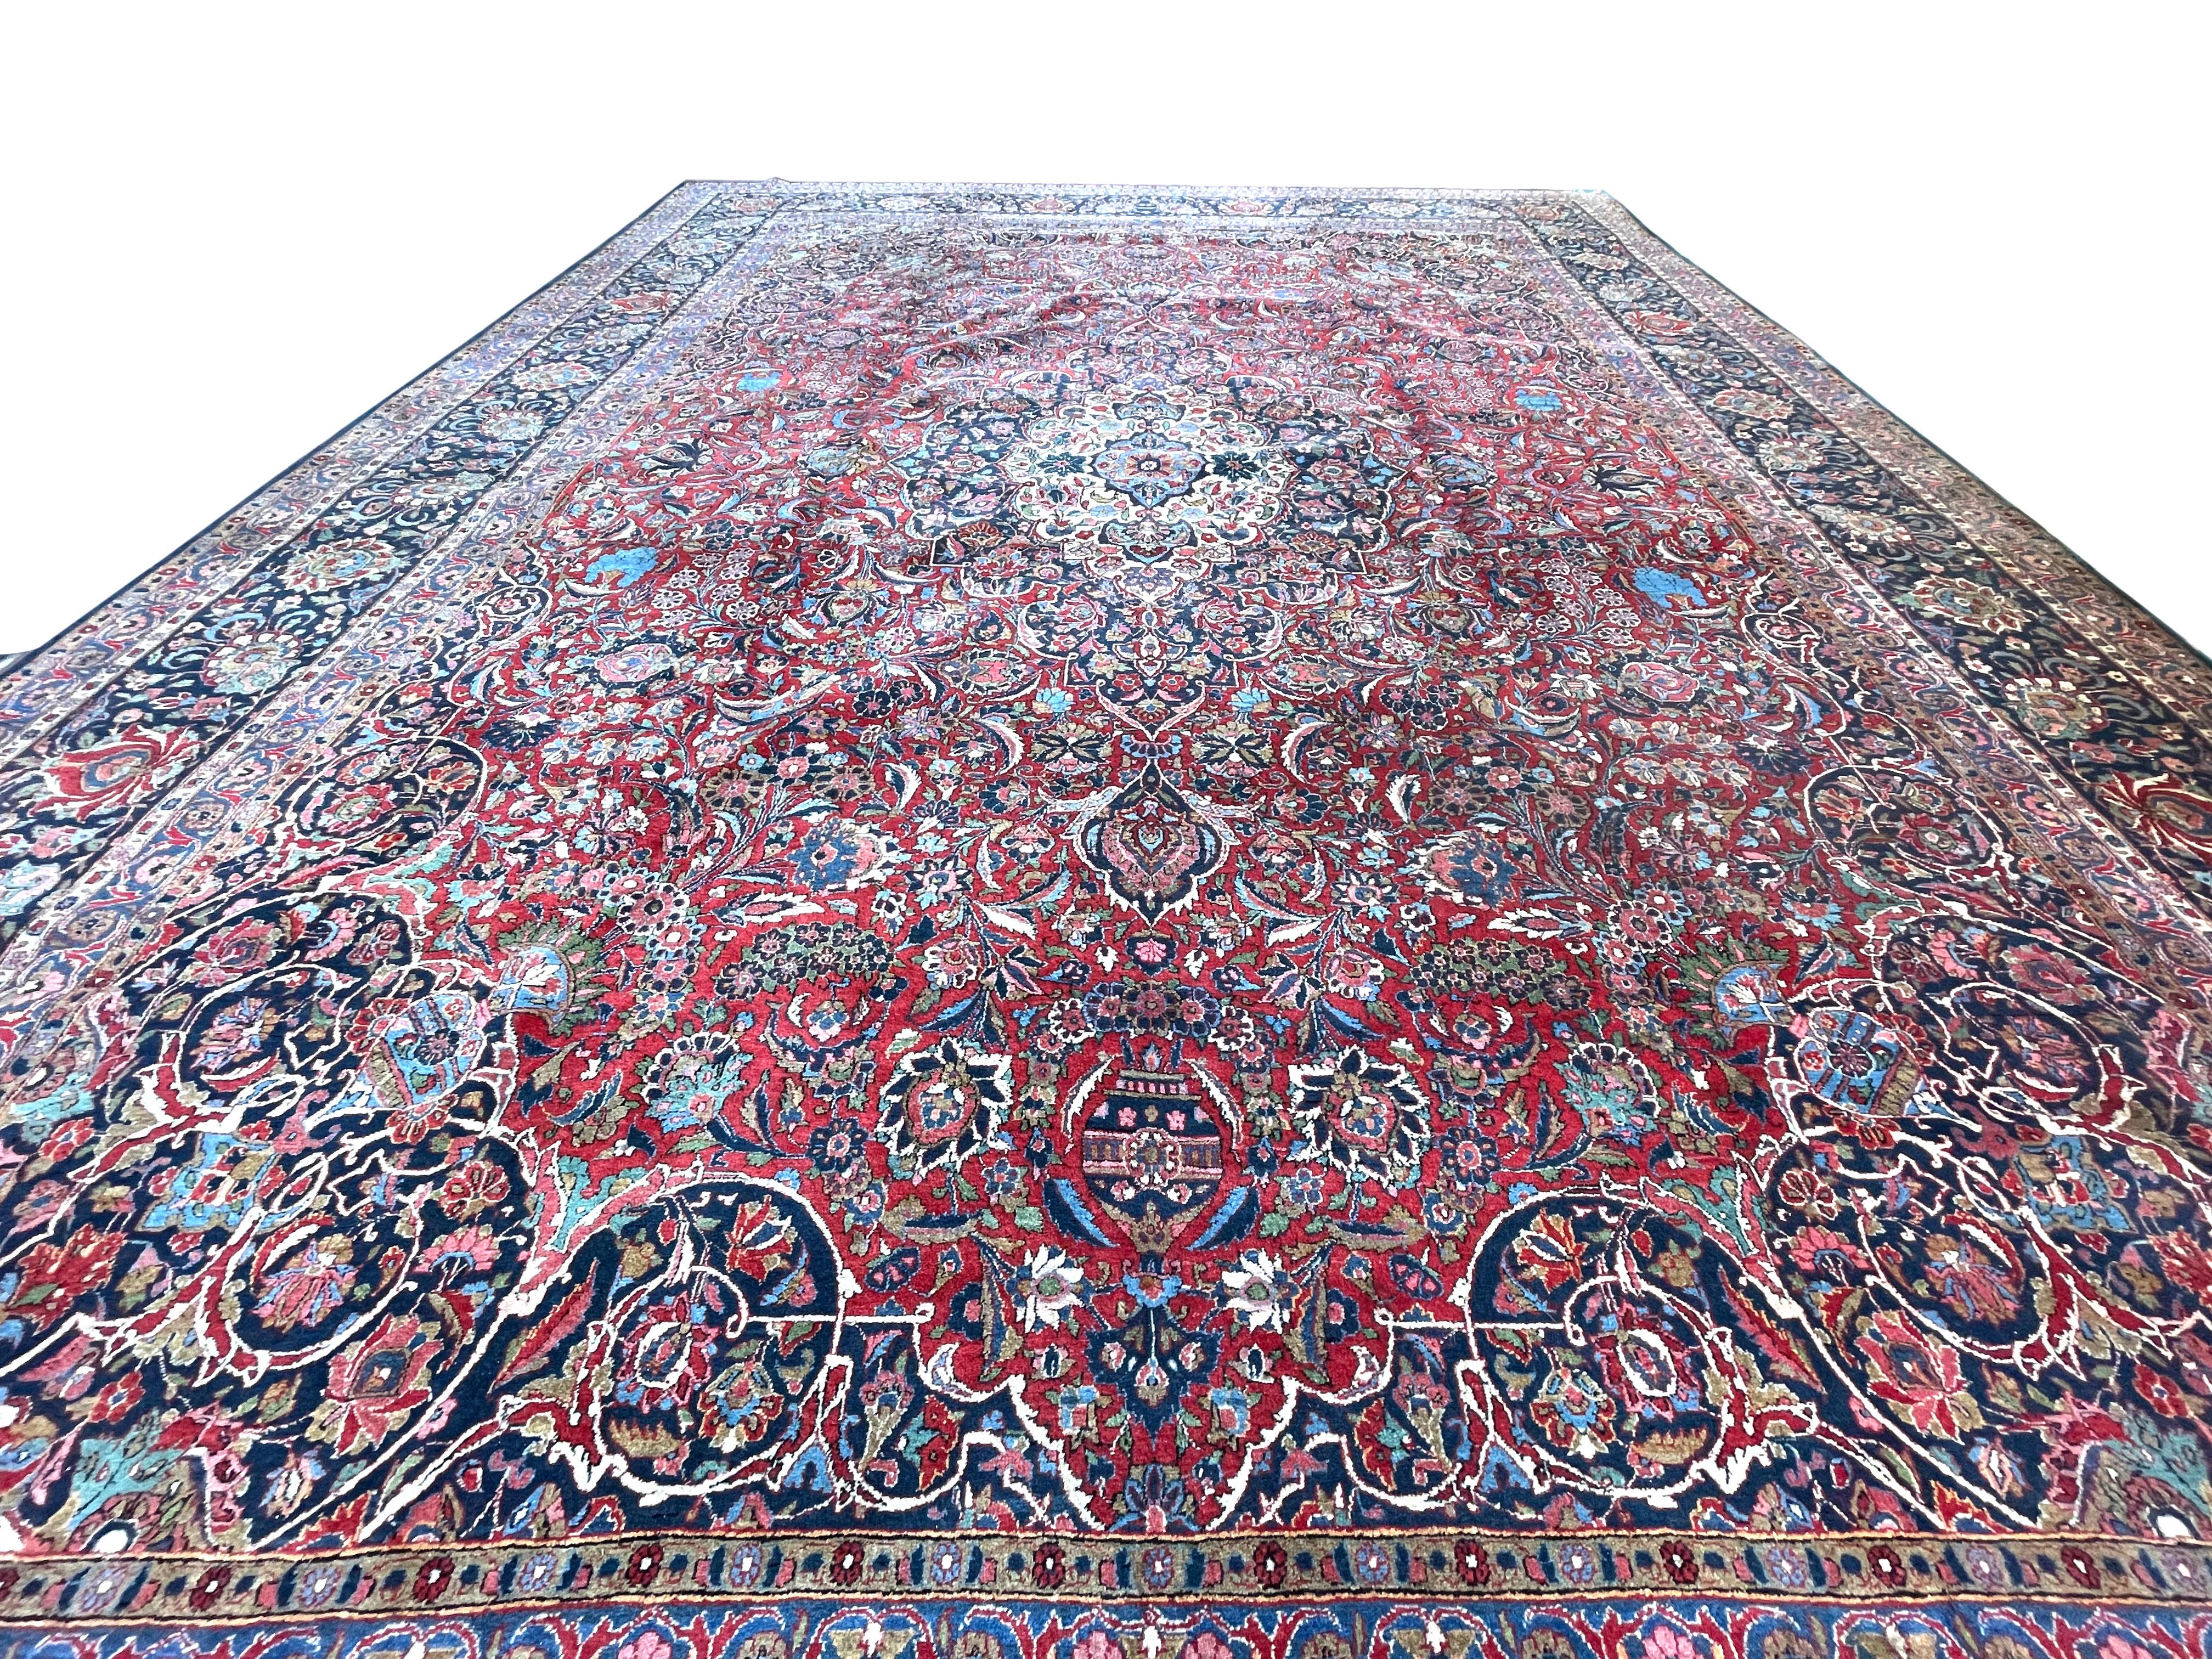 This handmade rug originally from Kashan which are one of the traditional classifications of Persian rugs. This piece has Manchester wool pile with cotton foundation. The design is medallion floral with corner swirl design with great tensile